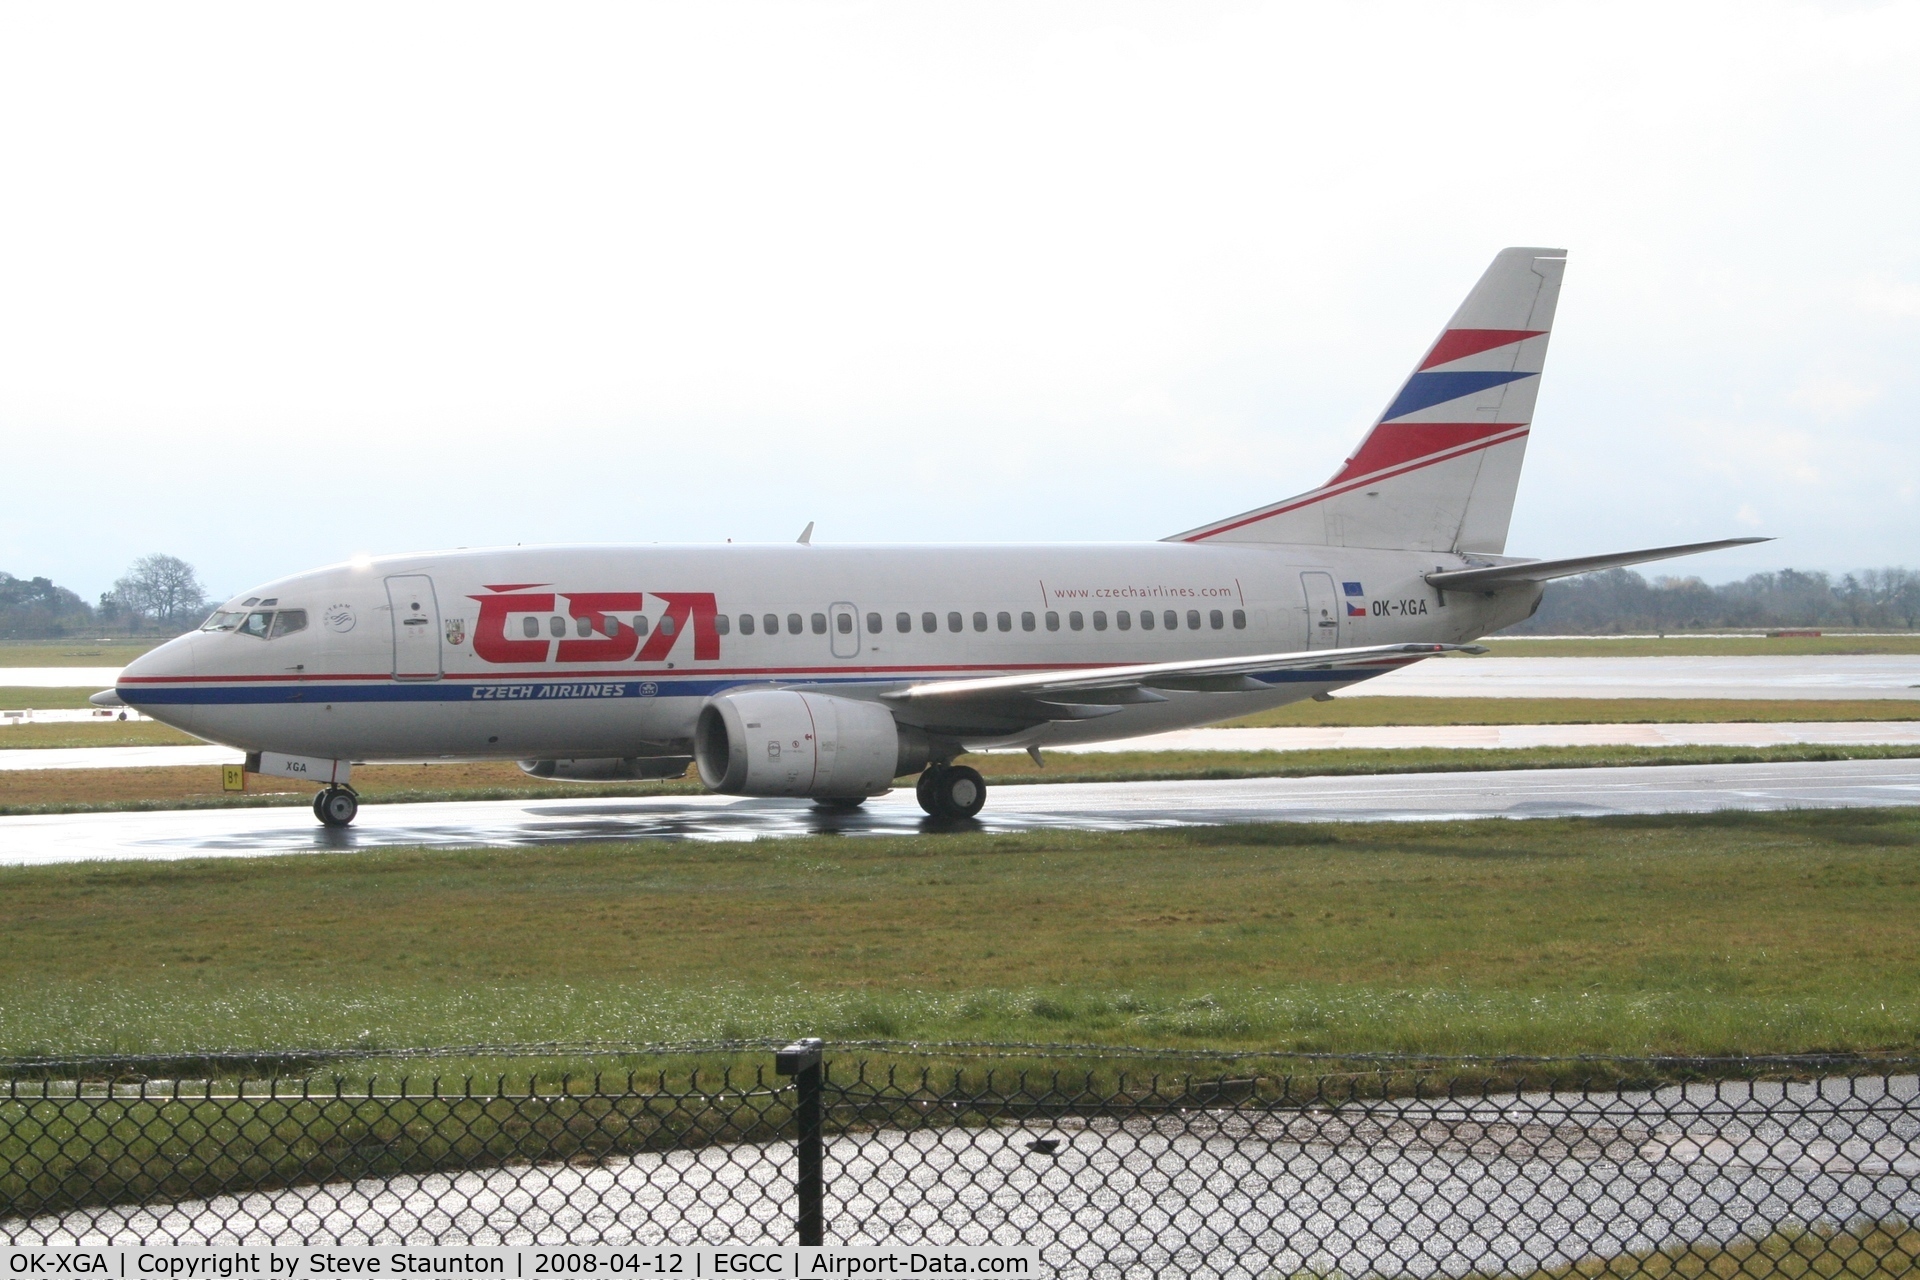 OK-XGA, 1992 Boeing 737-55S C/N 26539, Taken at Manchester Airport on a typical showery April day